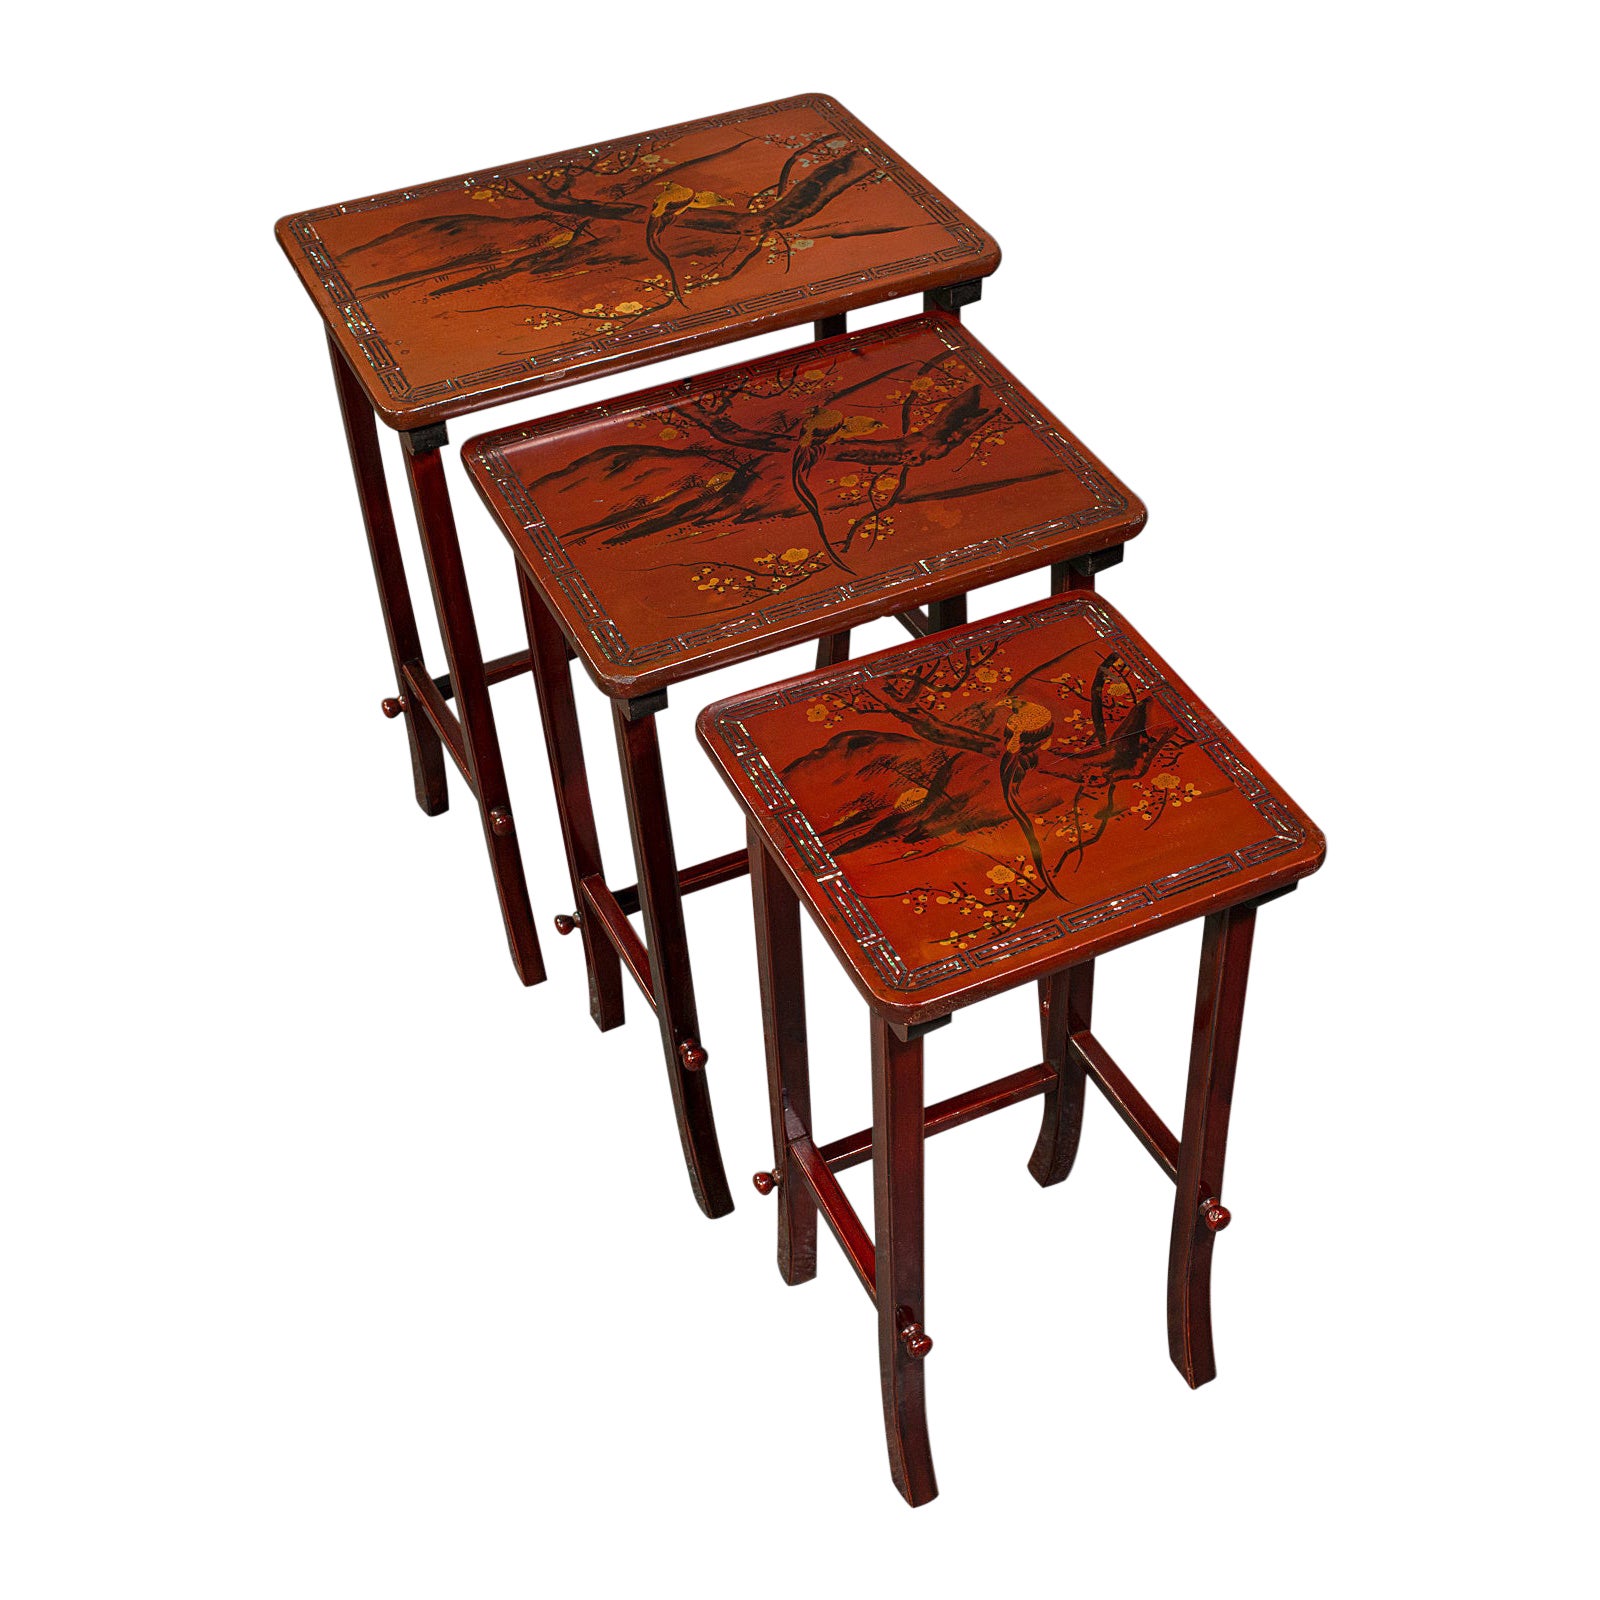 Antique Nest of 3 Occasional Side Tables, Oriental, Japanned, Victorian, C.1900 For Sale